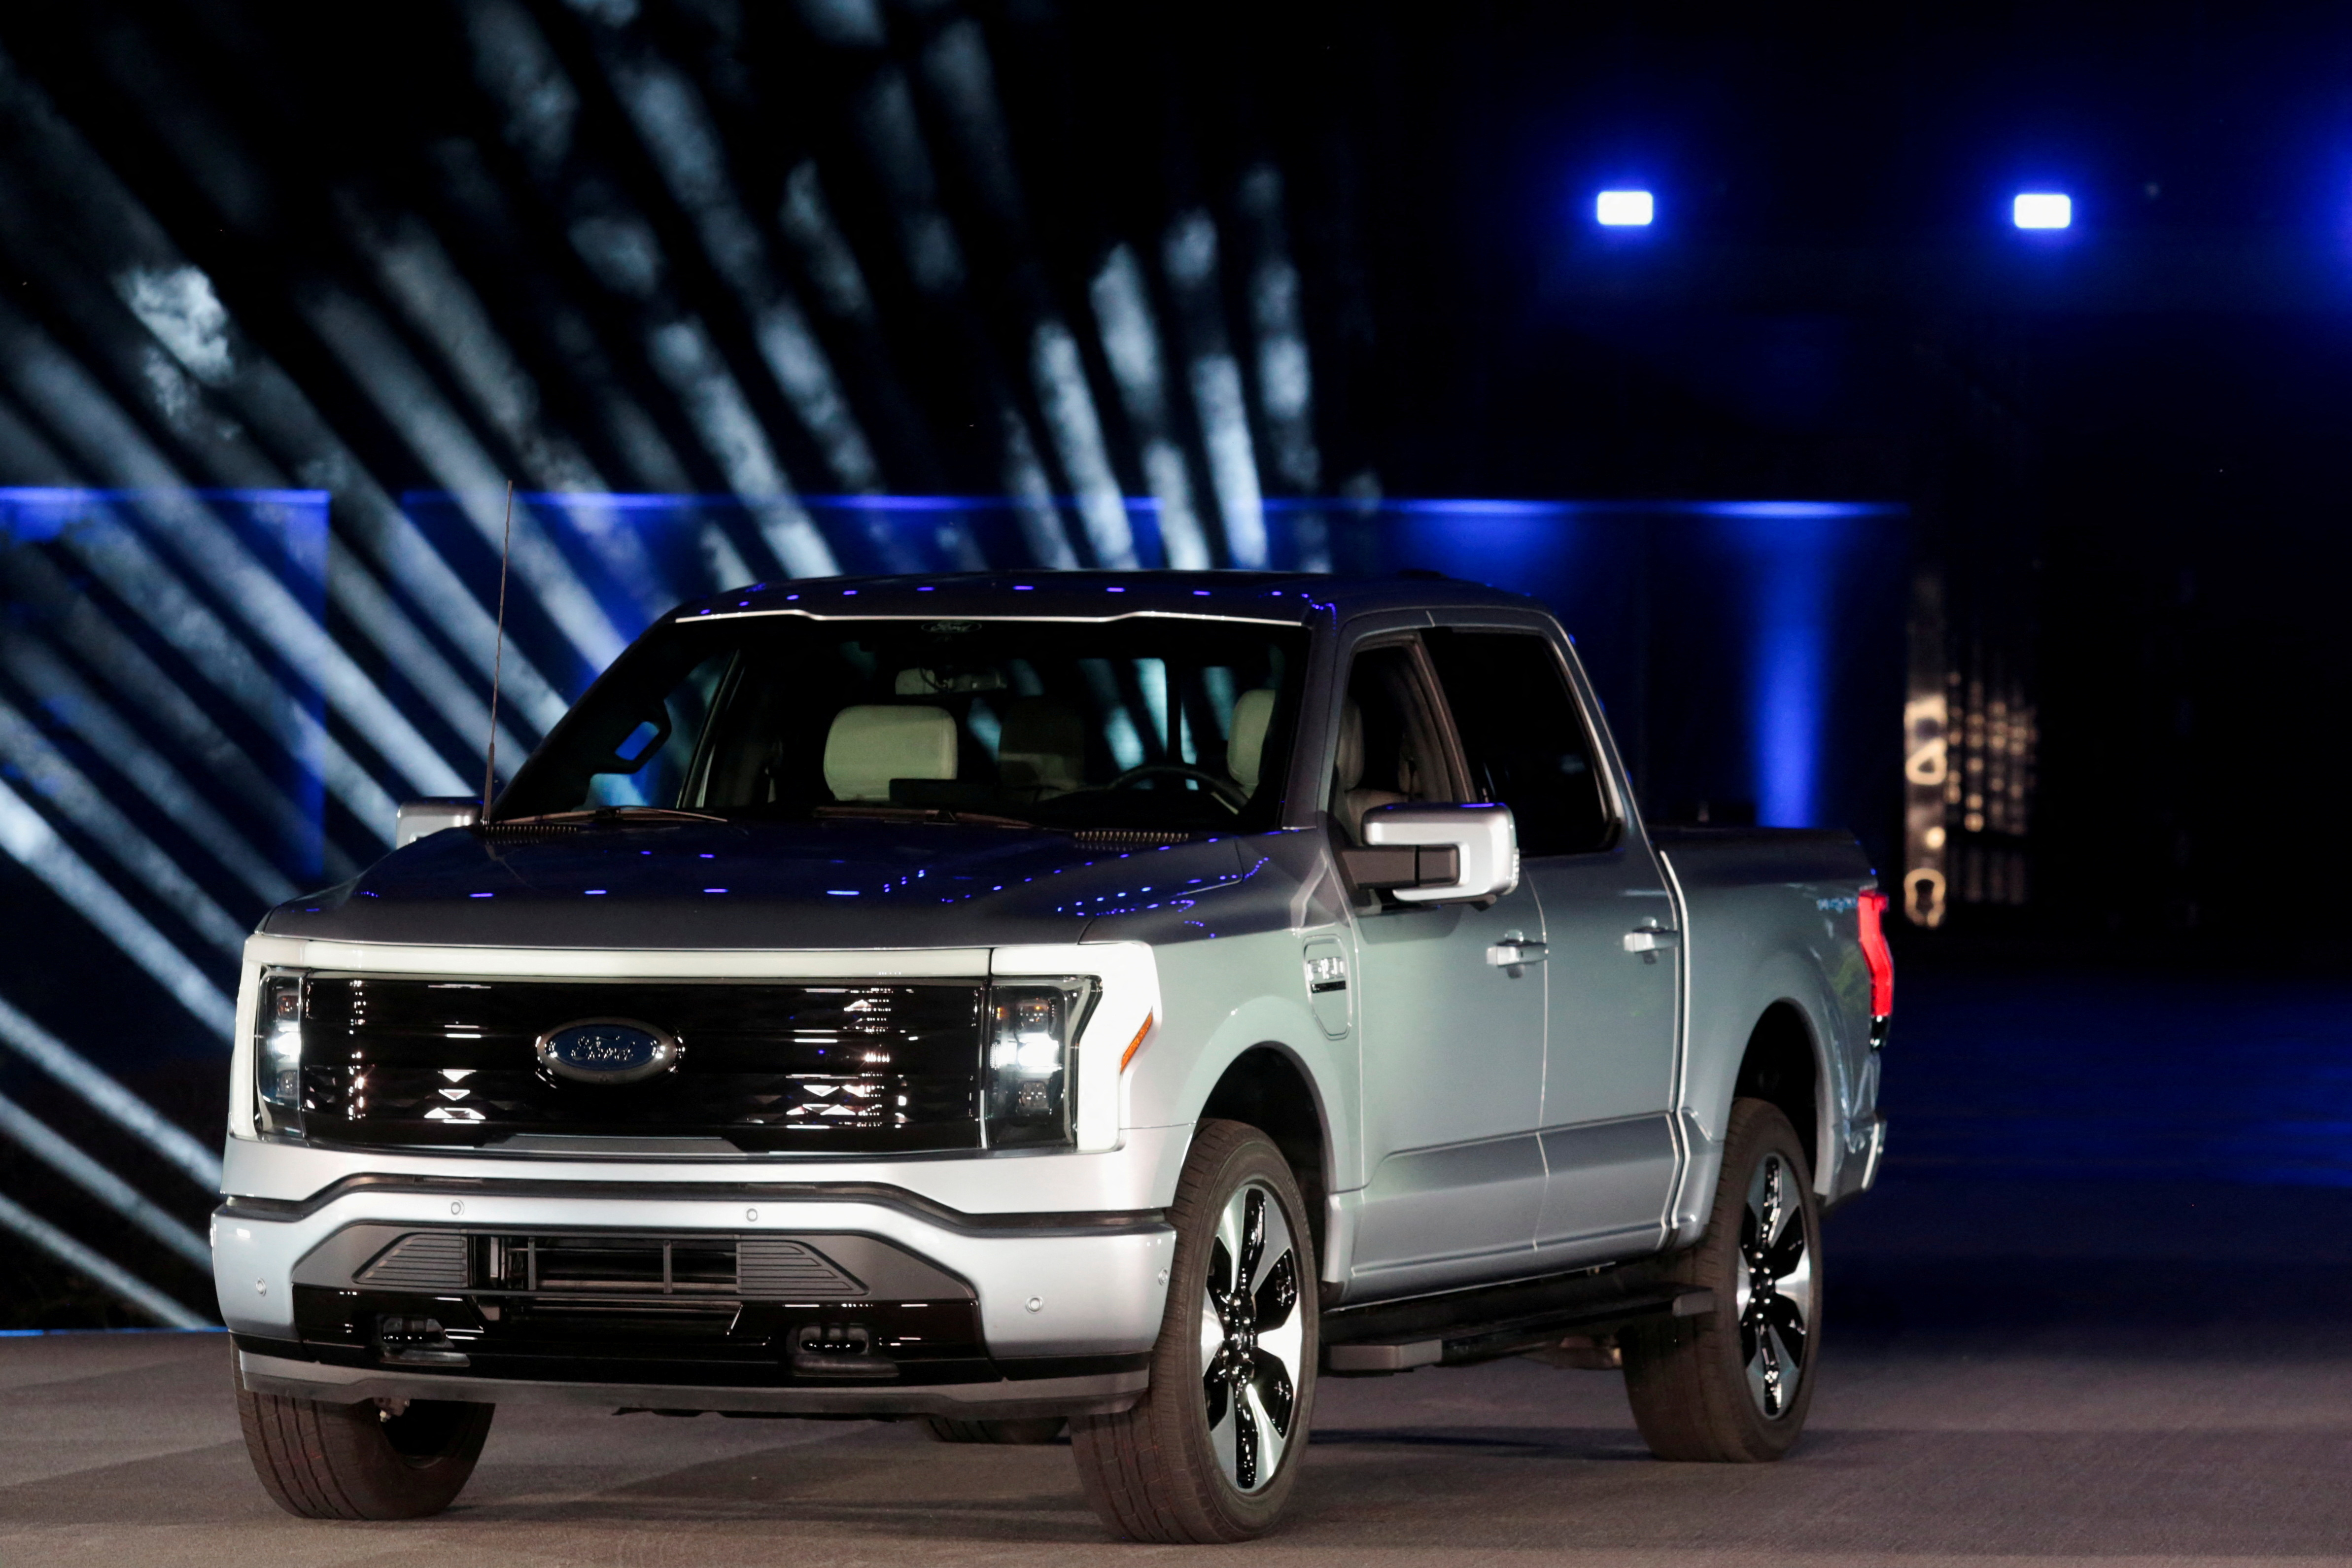 Introducing the all-electric Ford F-150 Lightning pickup truck in Dearborn